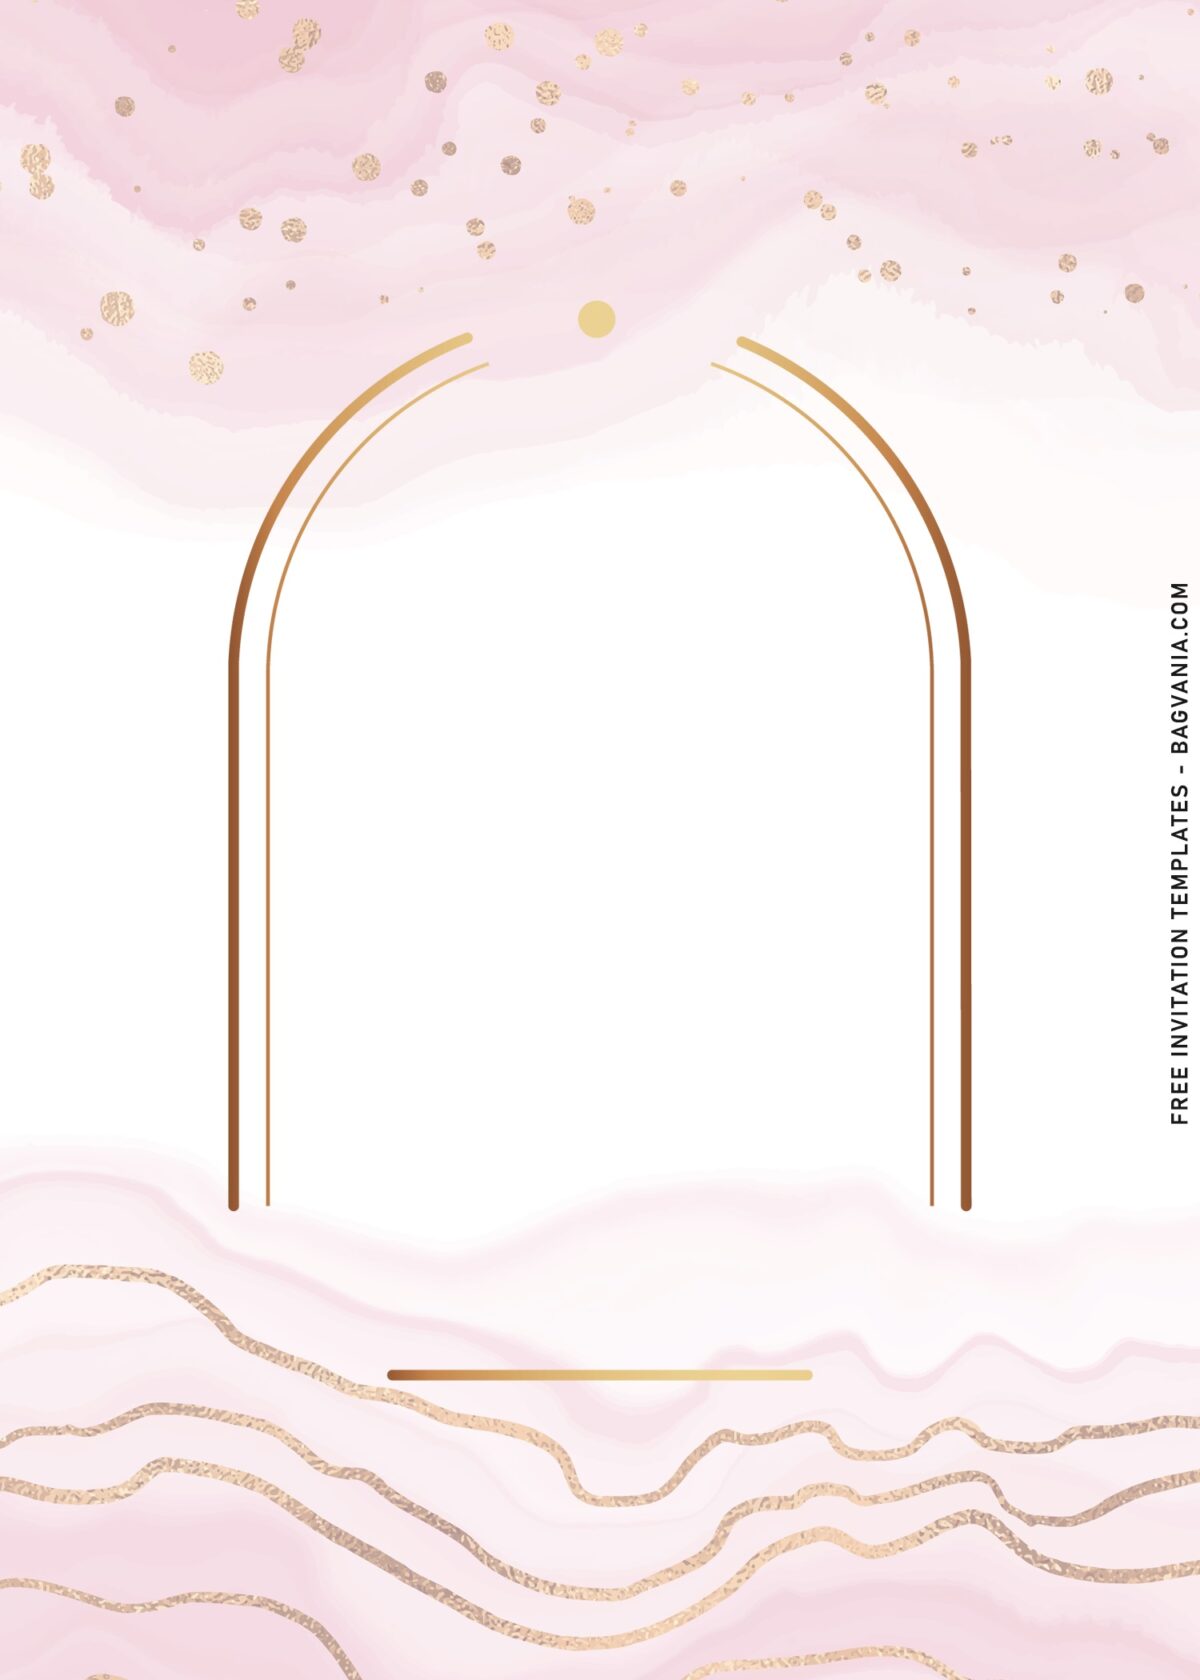 11+ Beautiful Pastel Blush And Gold Ornaments Birthday Invitation Templates with Golden Arch frame